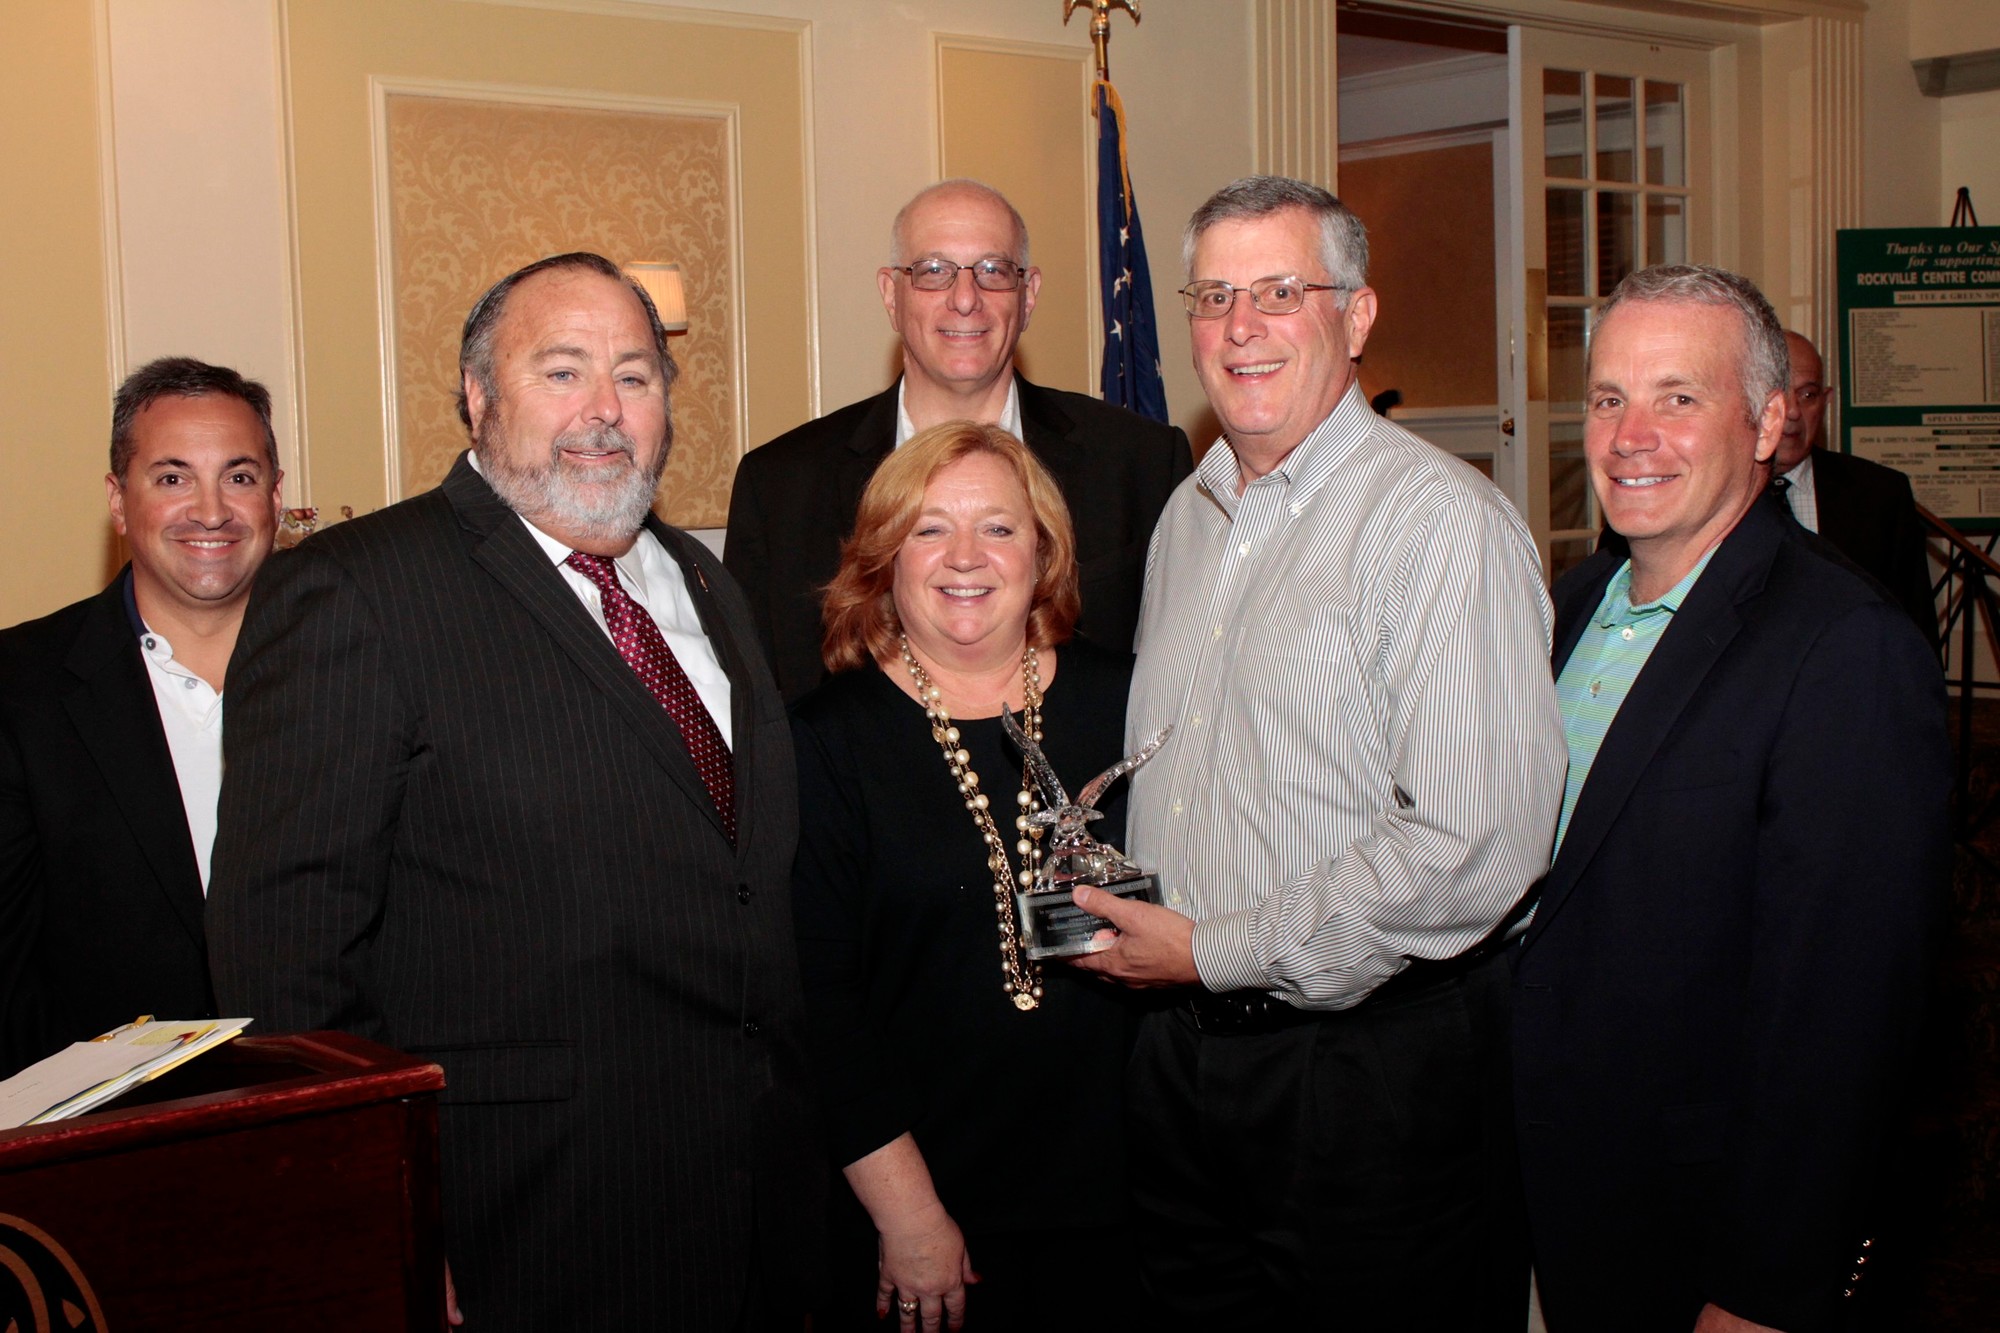 The Village Board of Trustees Congratulated former Village Trustee Jack Matthews, second from right, who won the Outstanding Community Service Award.